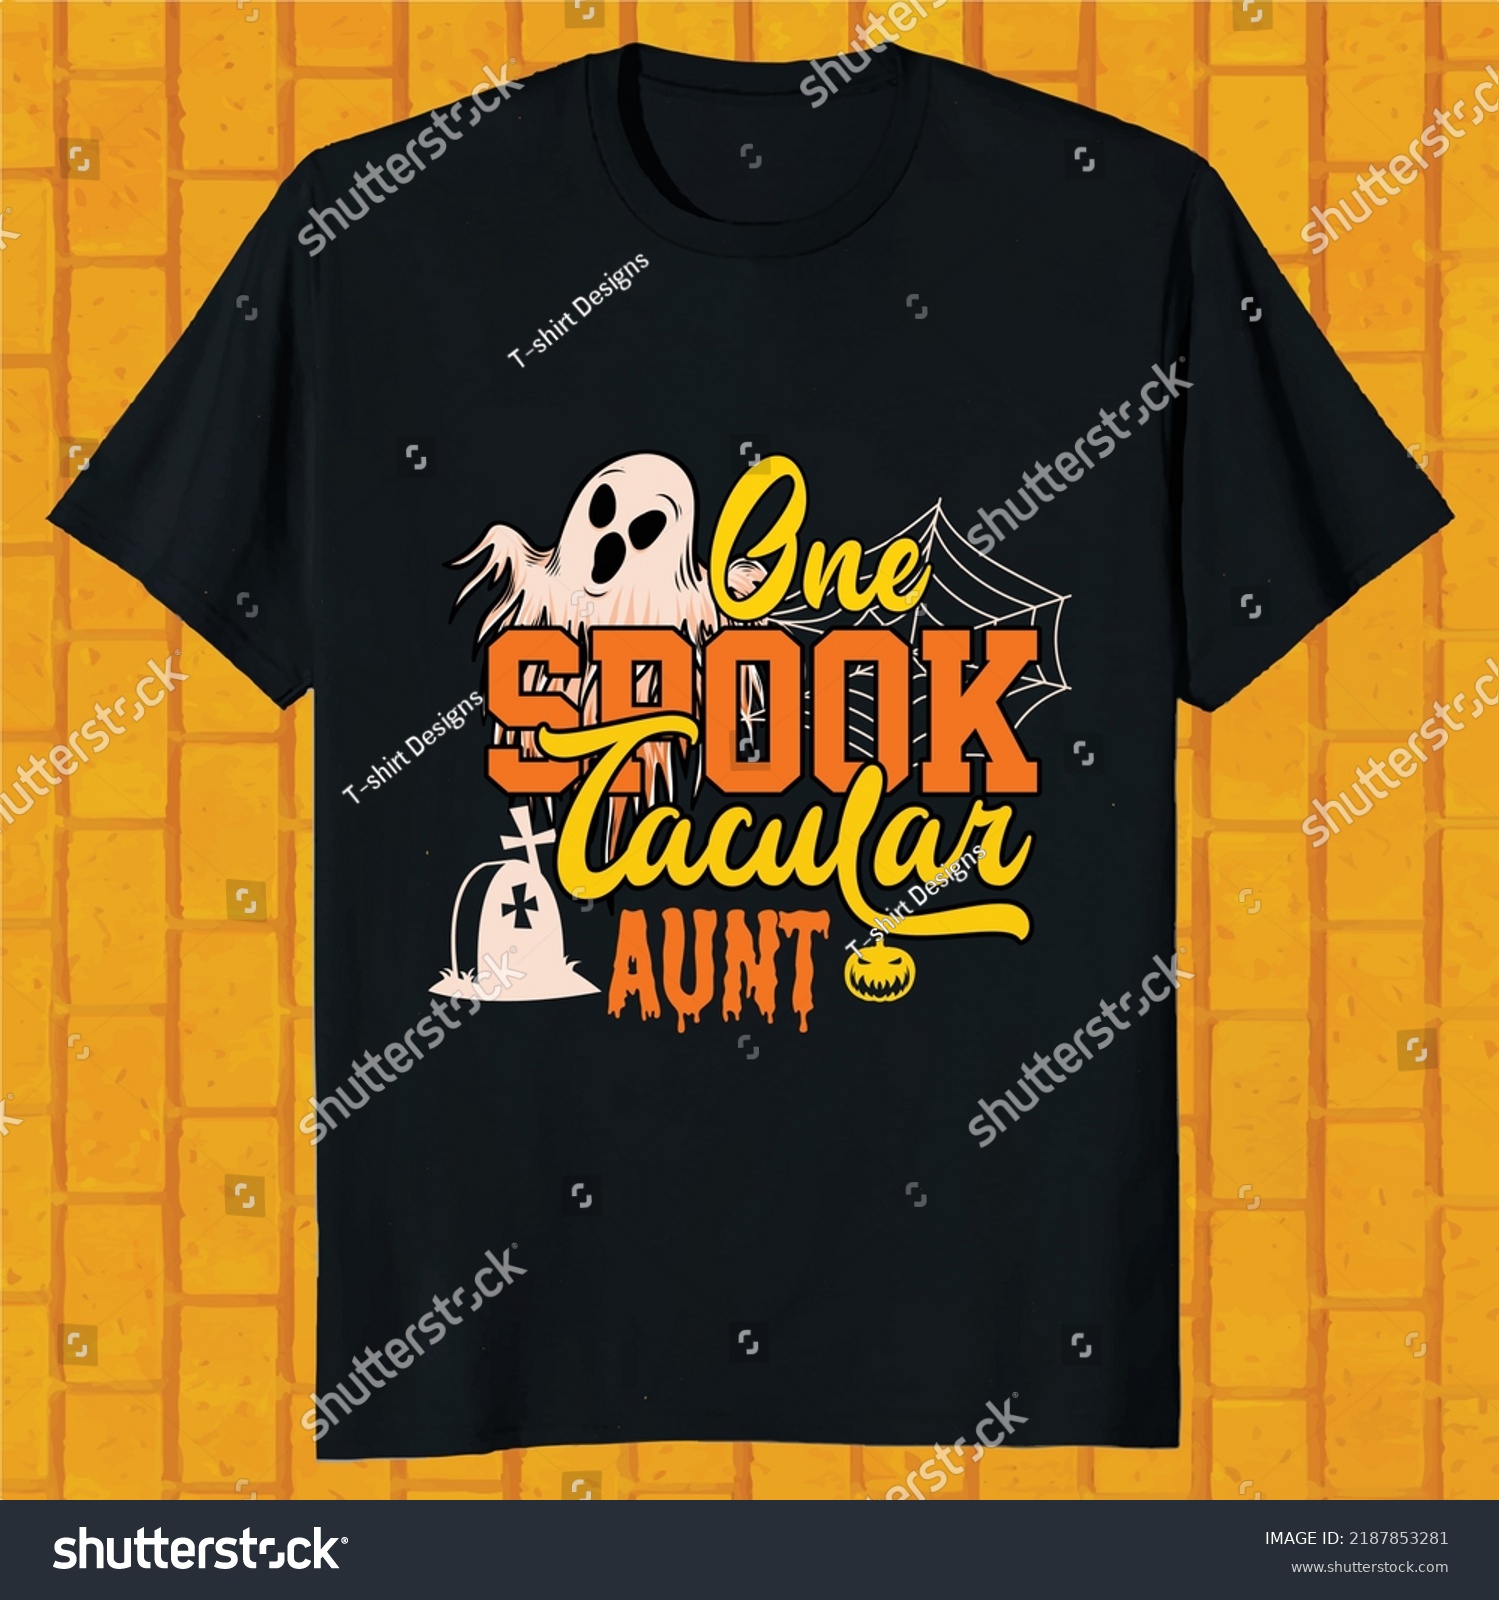 SVG of one spook tacular aunt hello ween t-shirt design svg